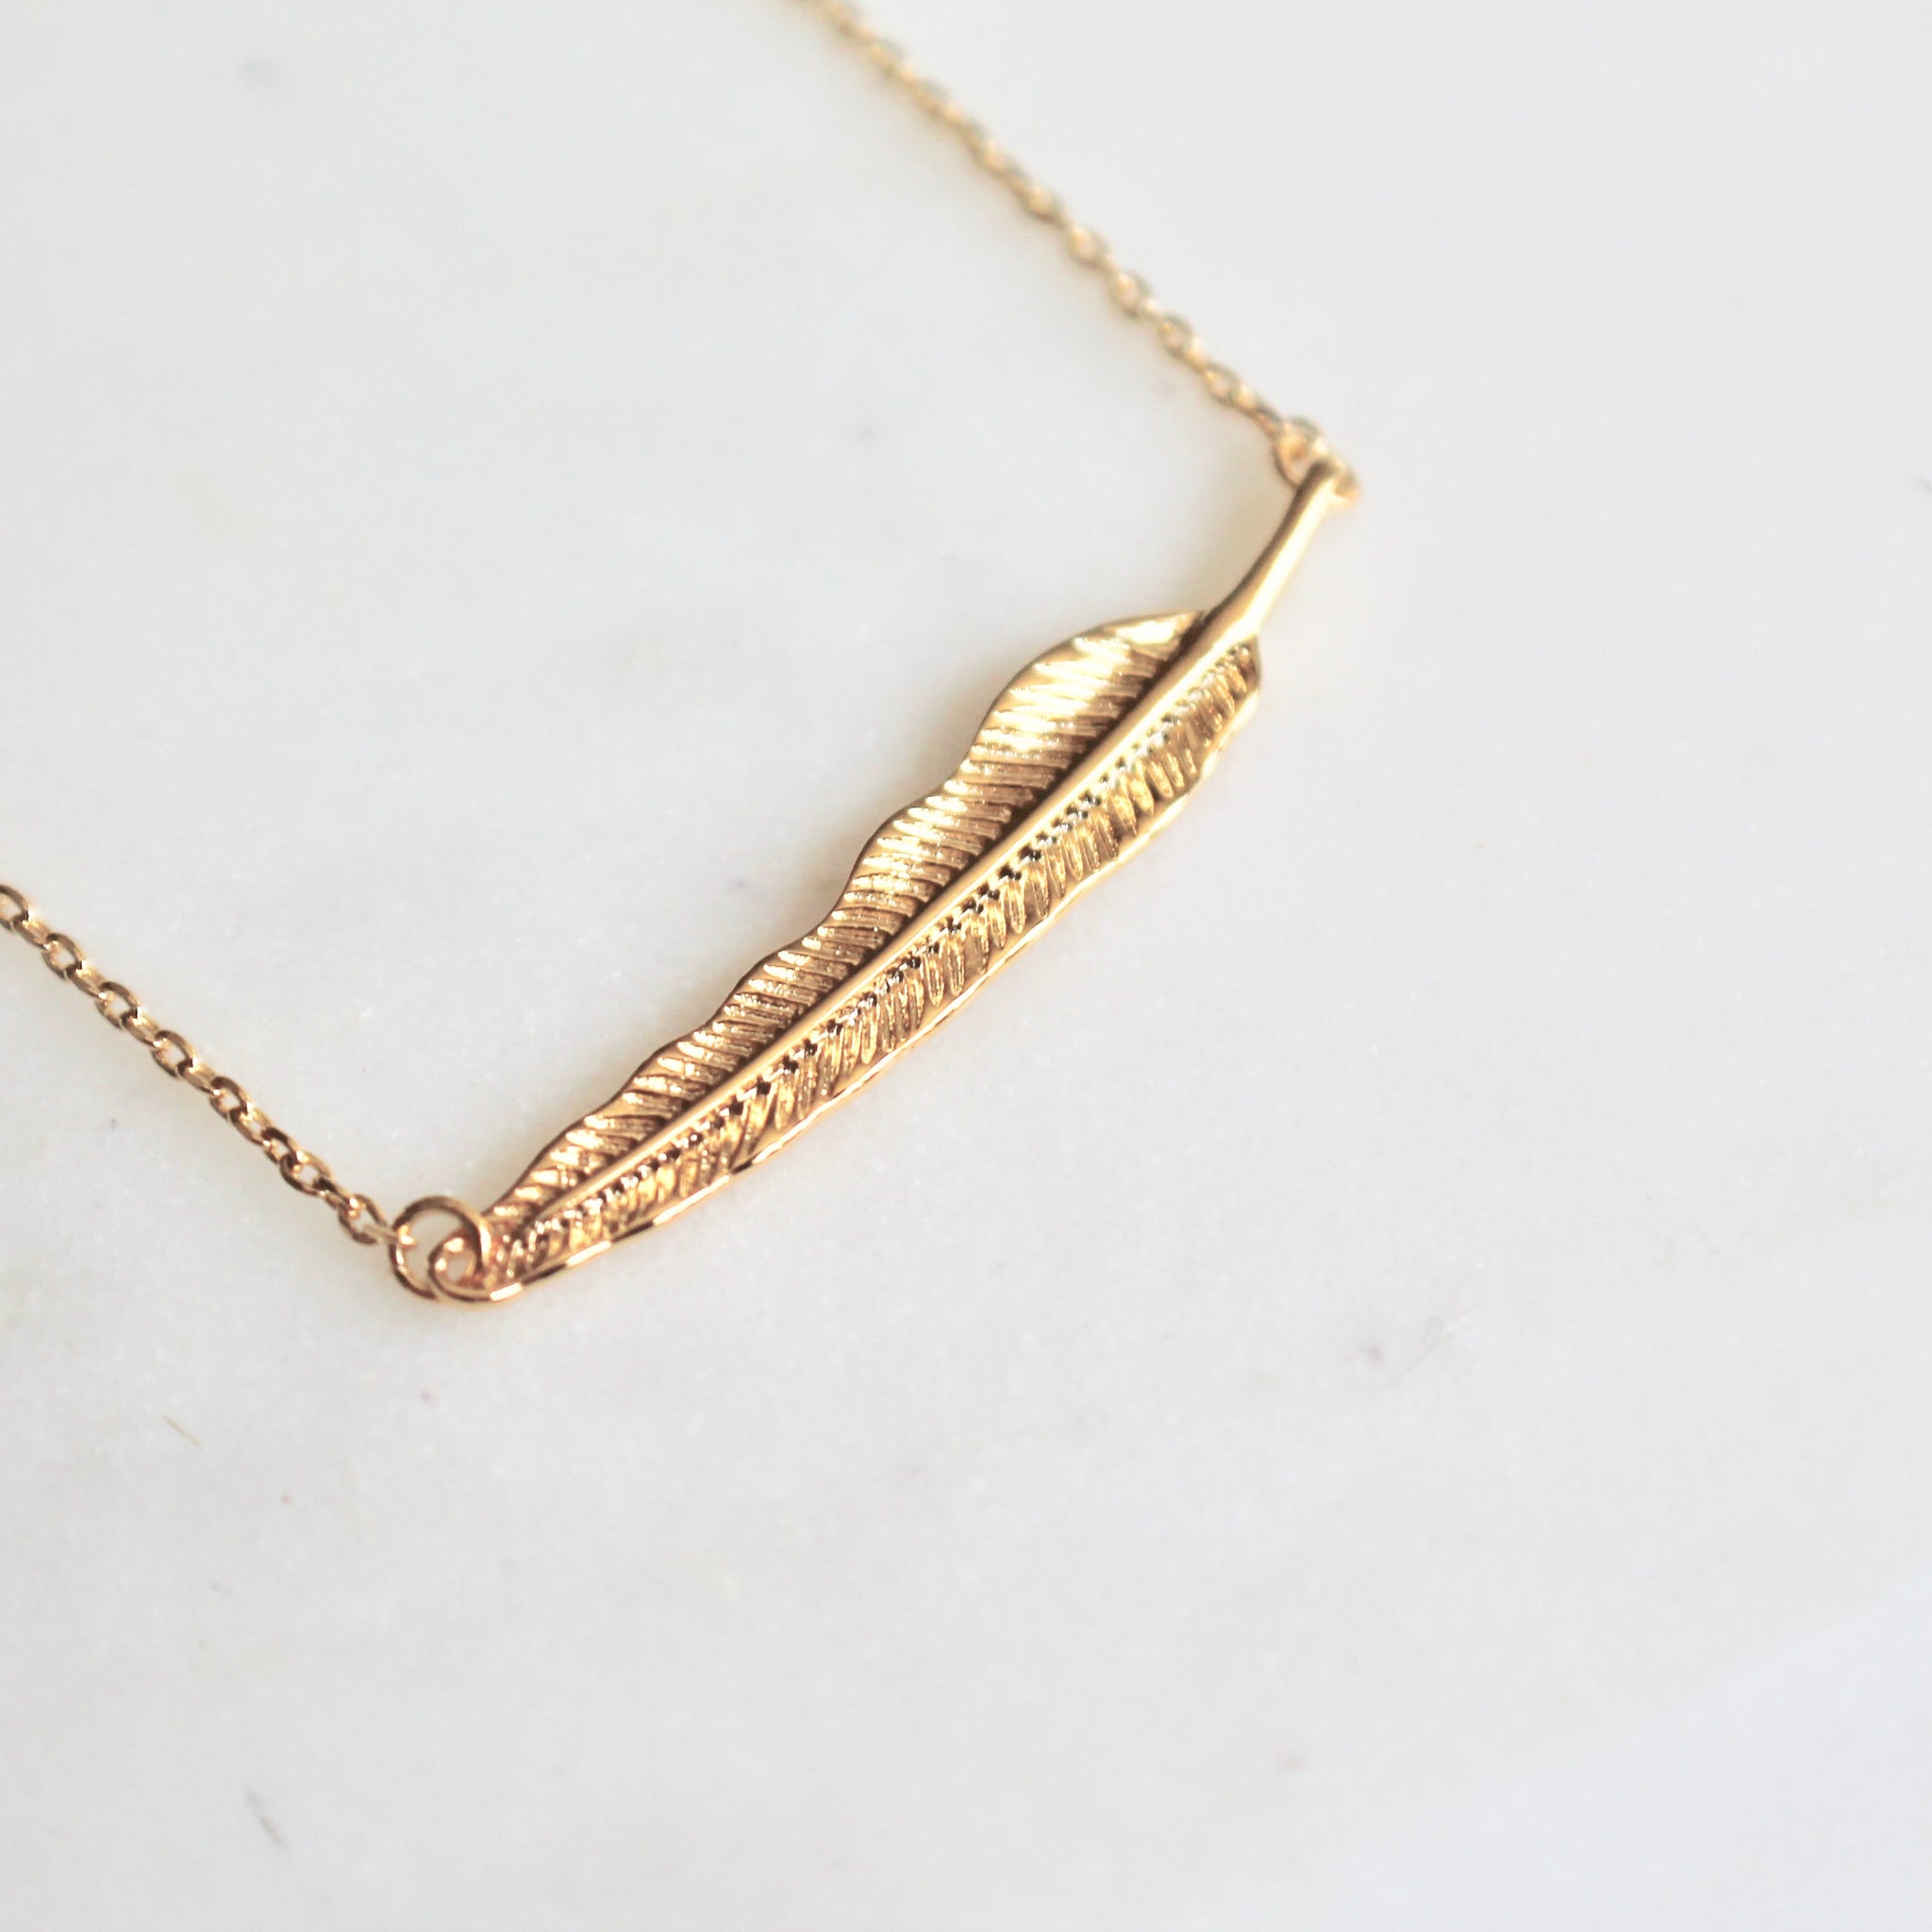 Feather dainty necklace